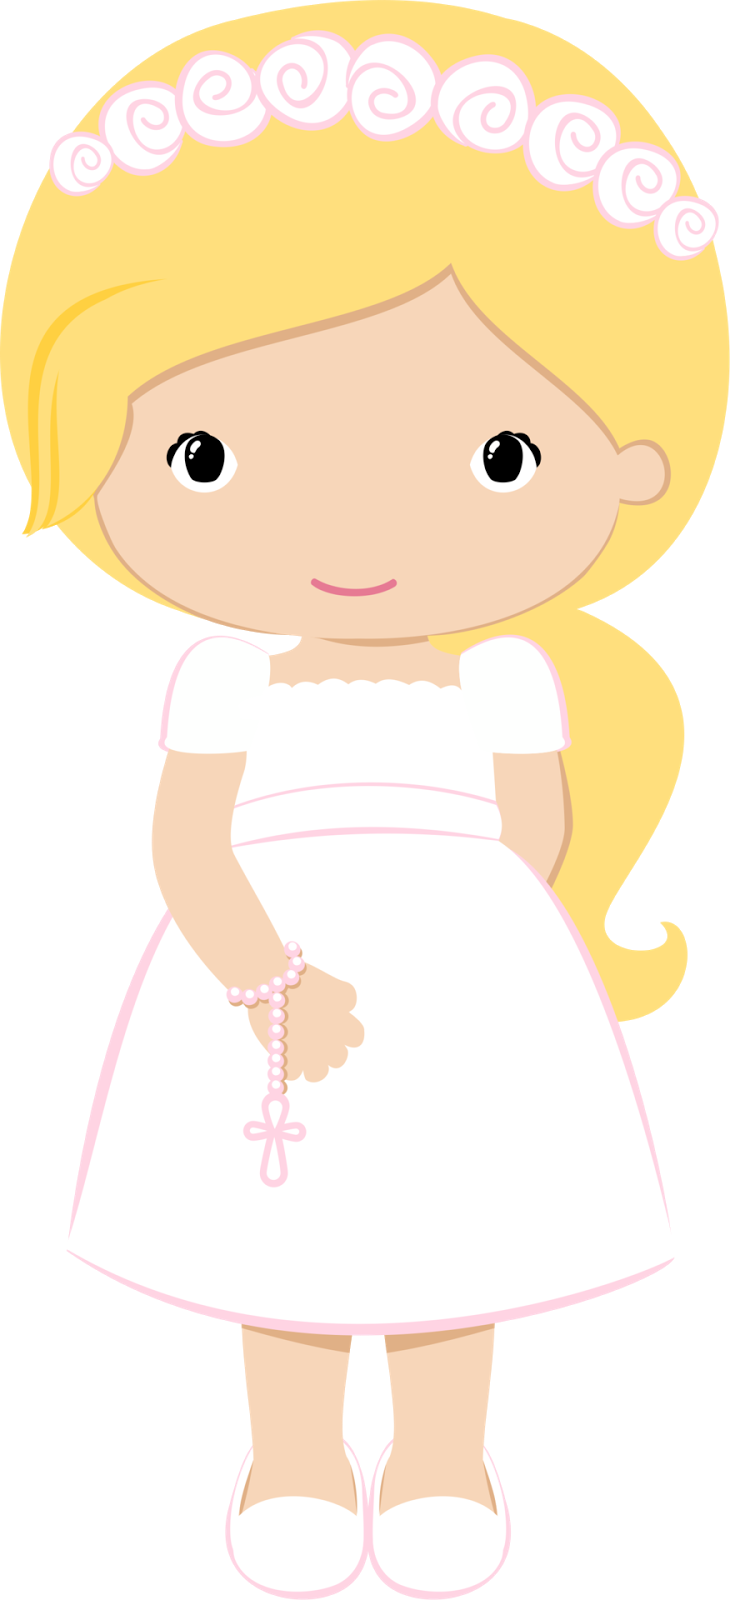 Girls In Pink For Their First Communion - Communion Girl Clip Art (730x1600)